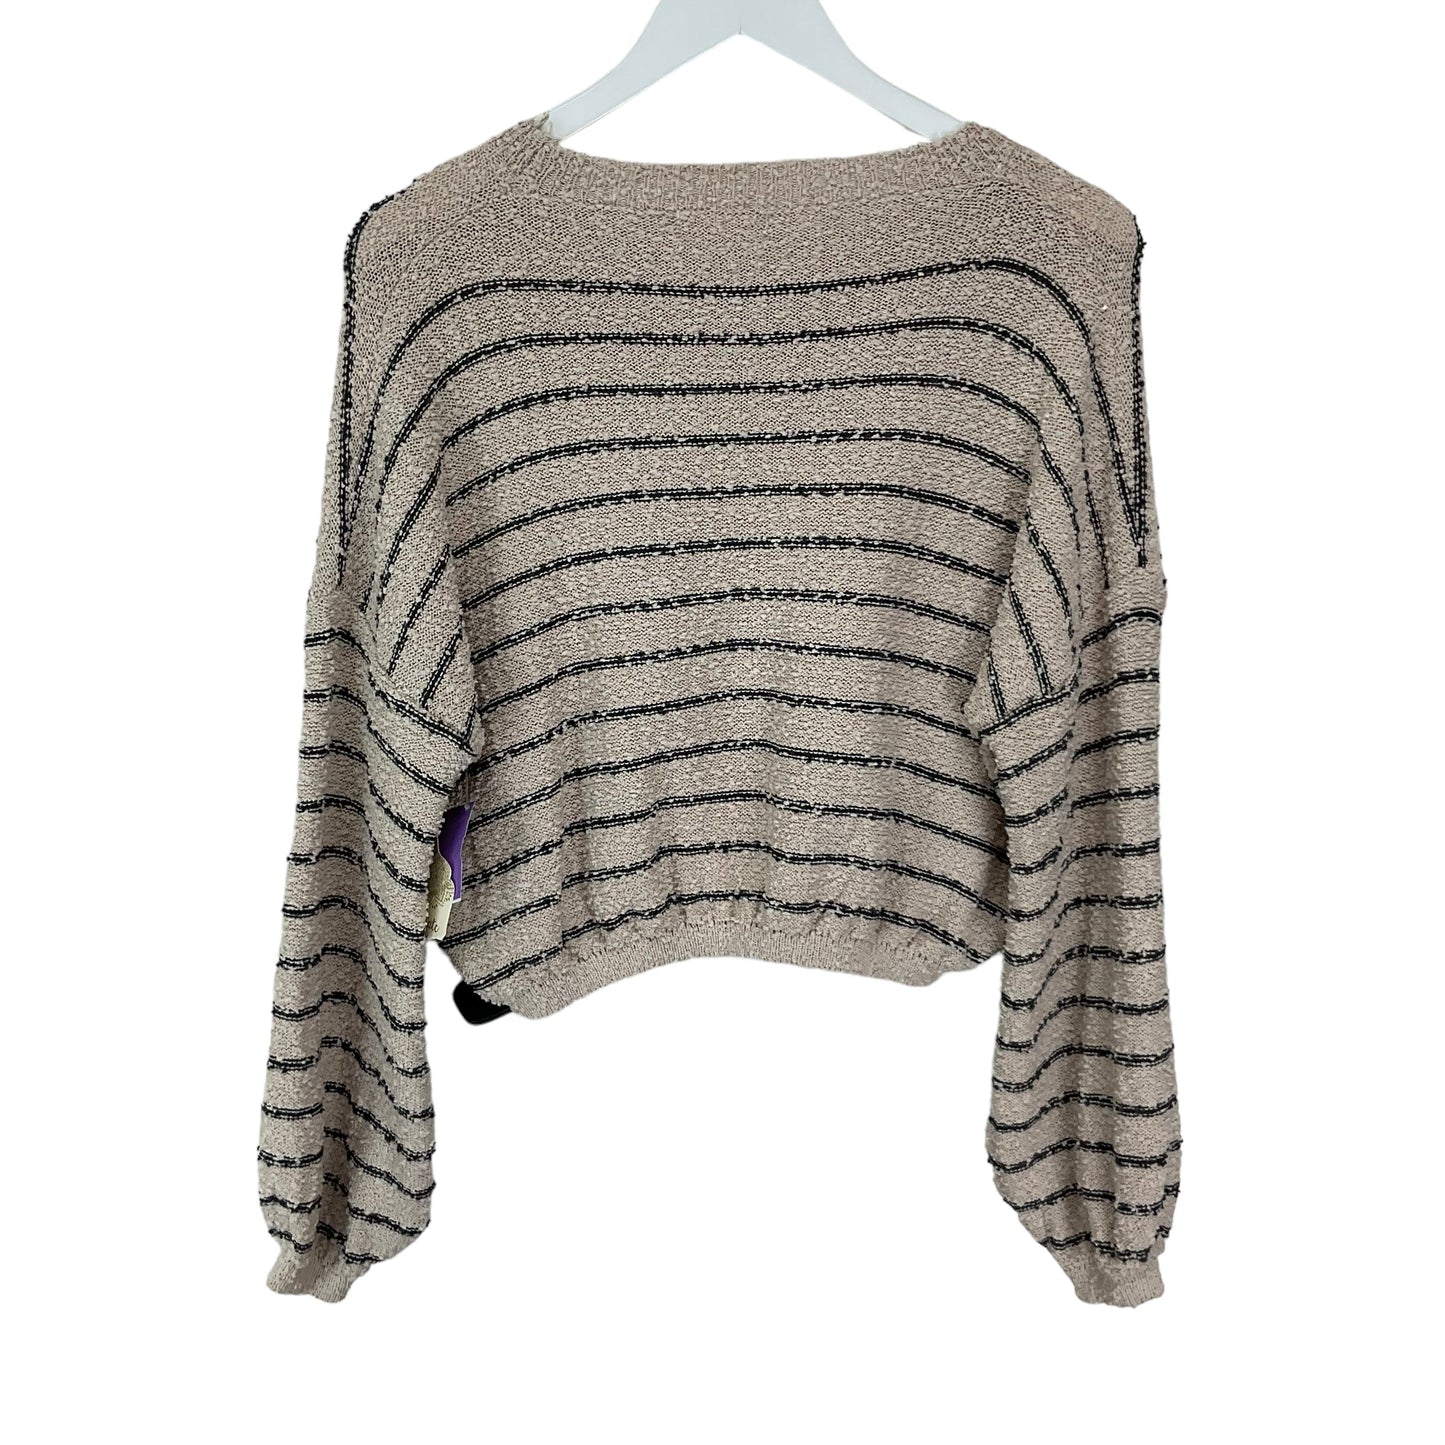 Striped Pattern Sweater Altard State, Size S